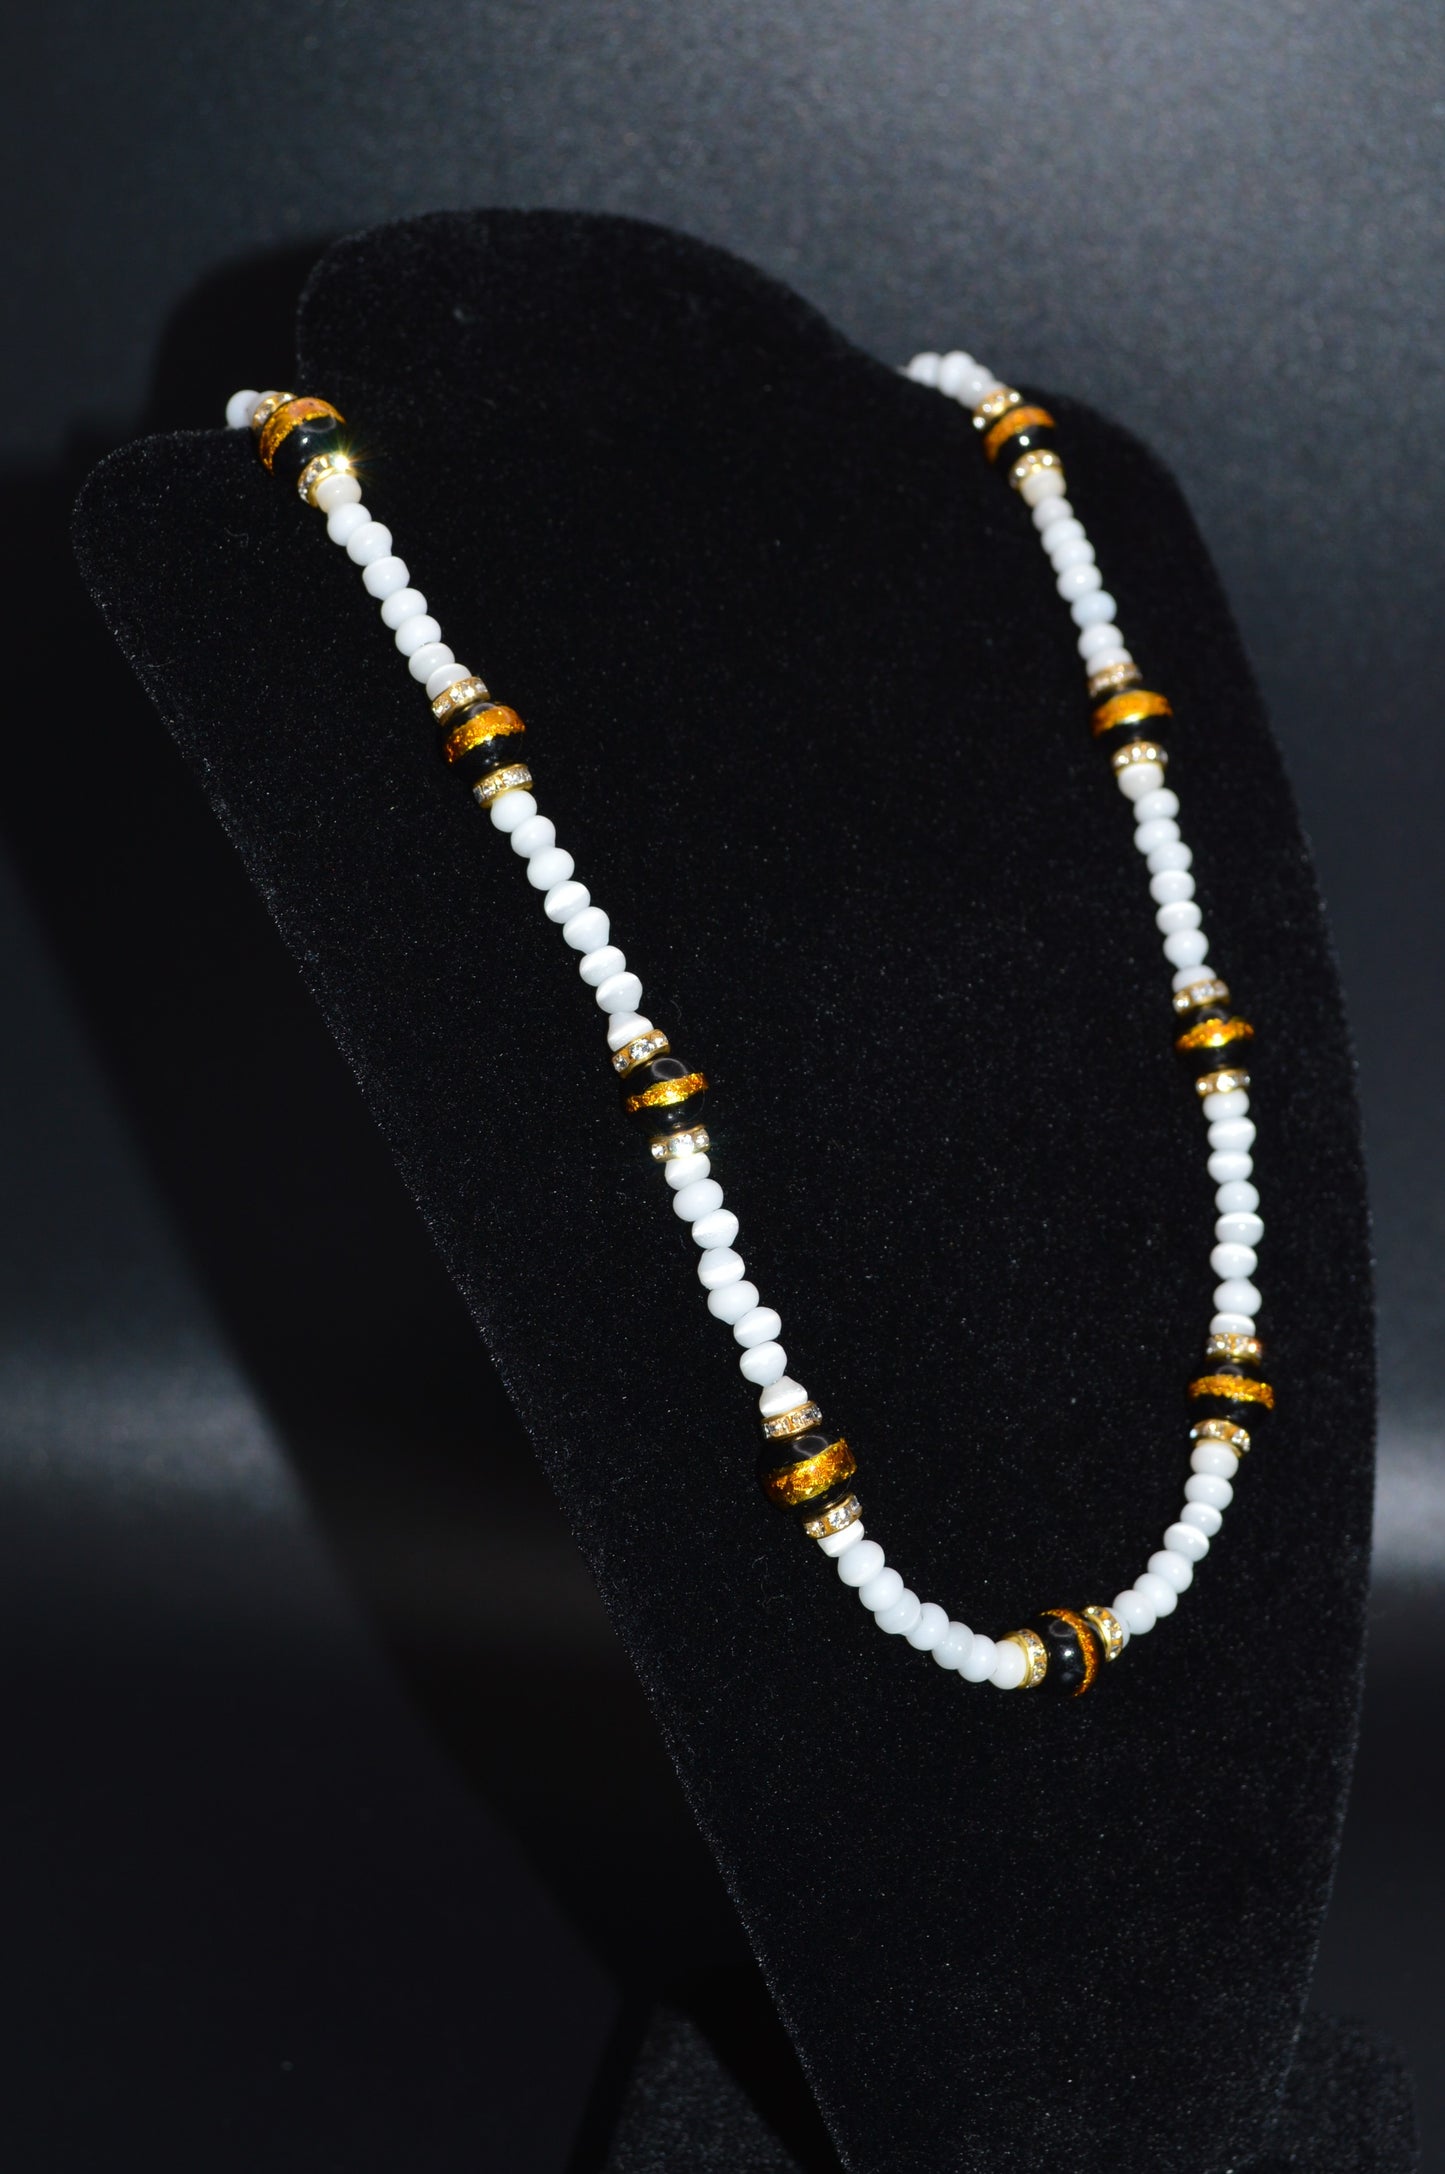 Black Gold Striped Glass Beads with Cat's Eye Glass Beads and Crystals Necklace